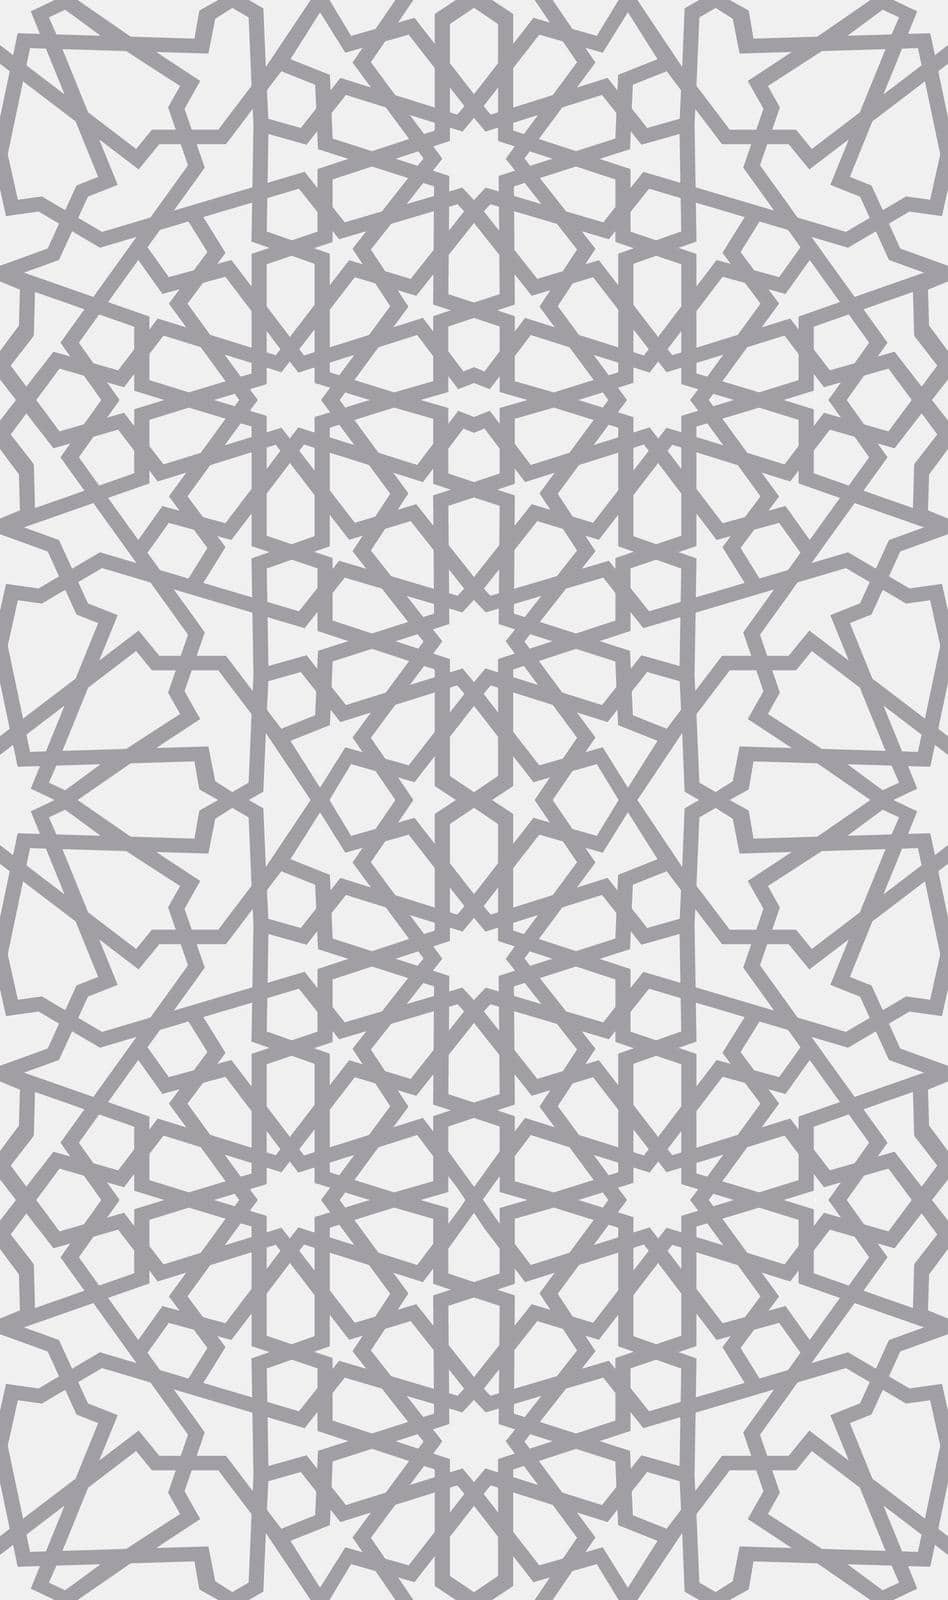 Islamic pattern . Seamless arabic geometric pattern, east ornament, indian ornament, persian motif, 3D. Endless texture can be used for wallpaper, pattern fills, page background .